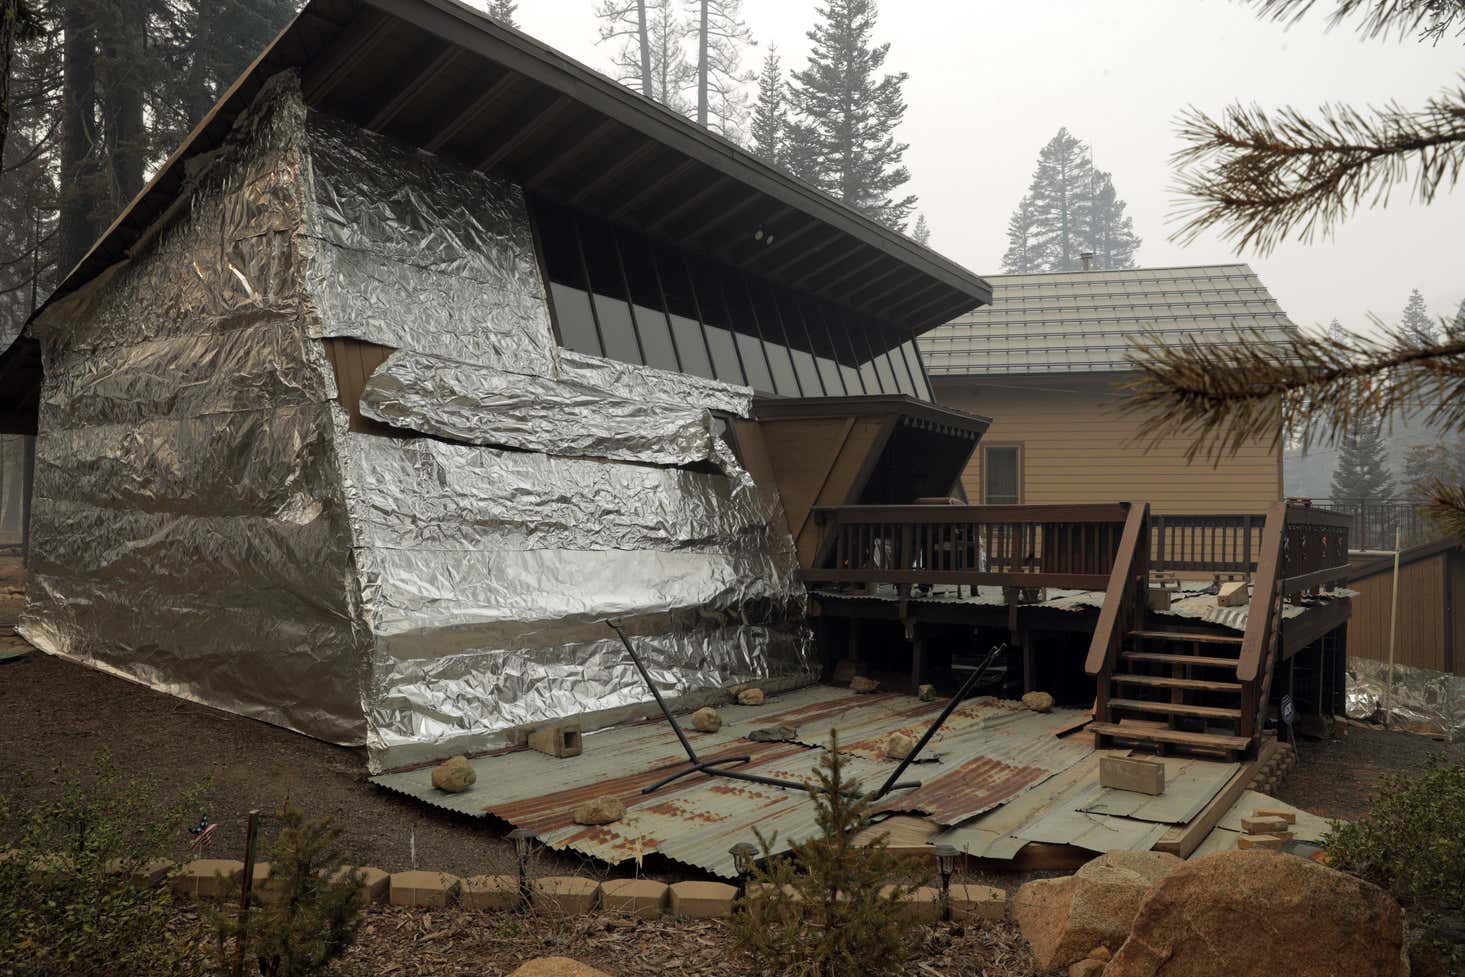 Can Aluminium Foil Really Protect Your Home in a Fire?